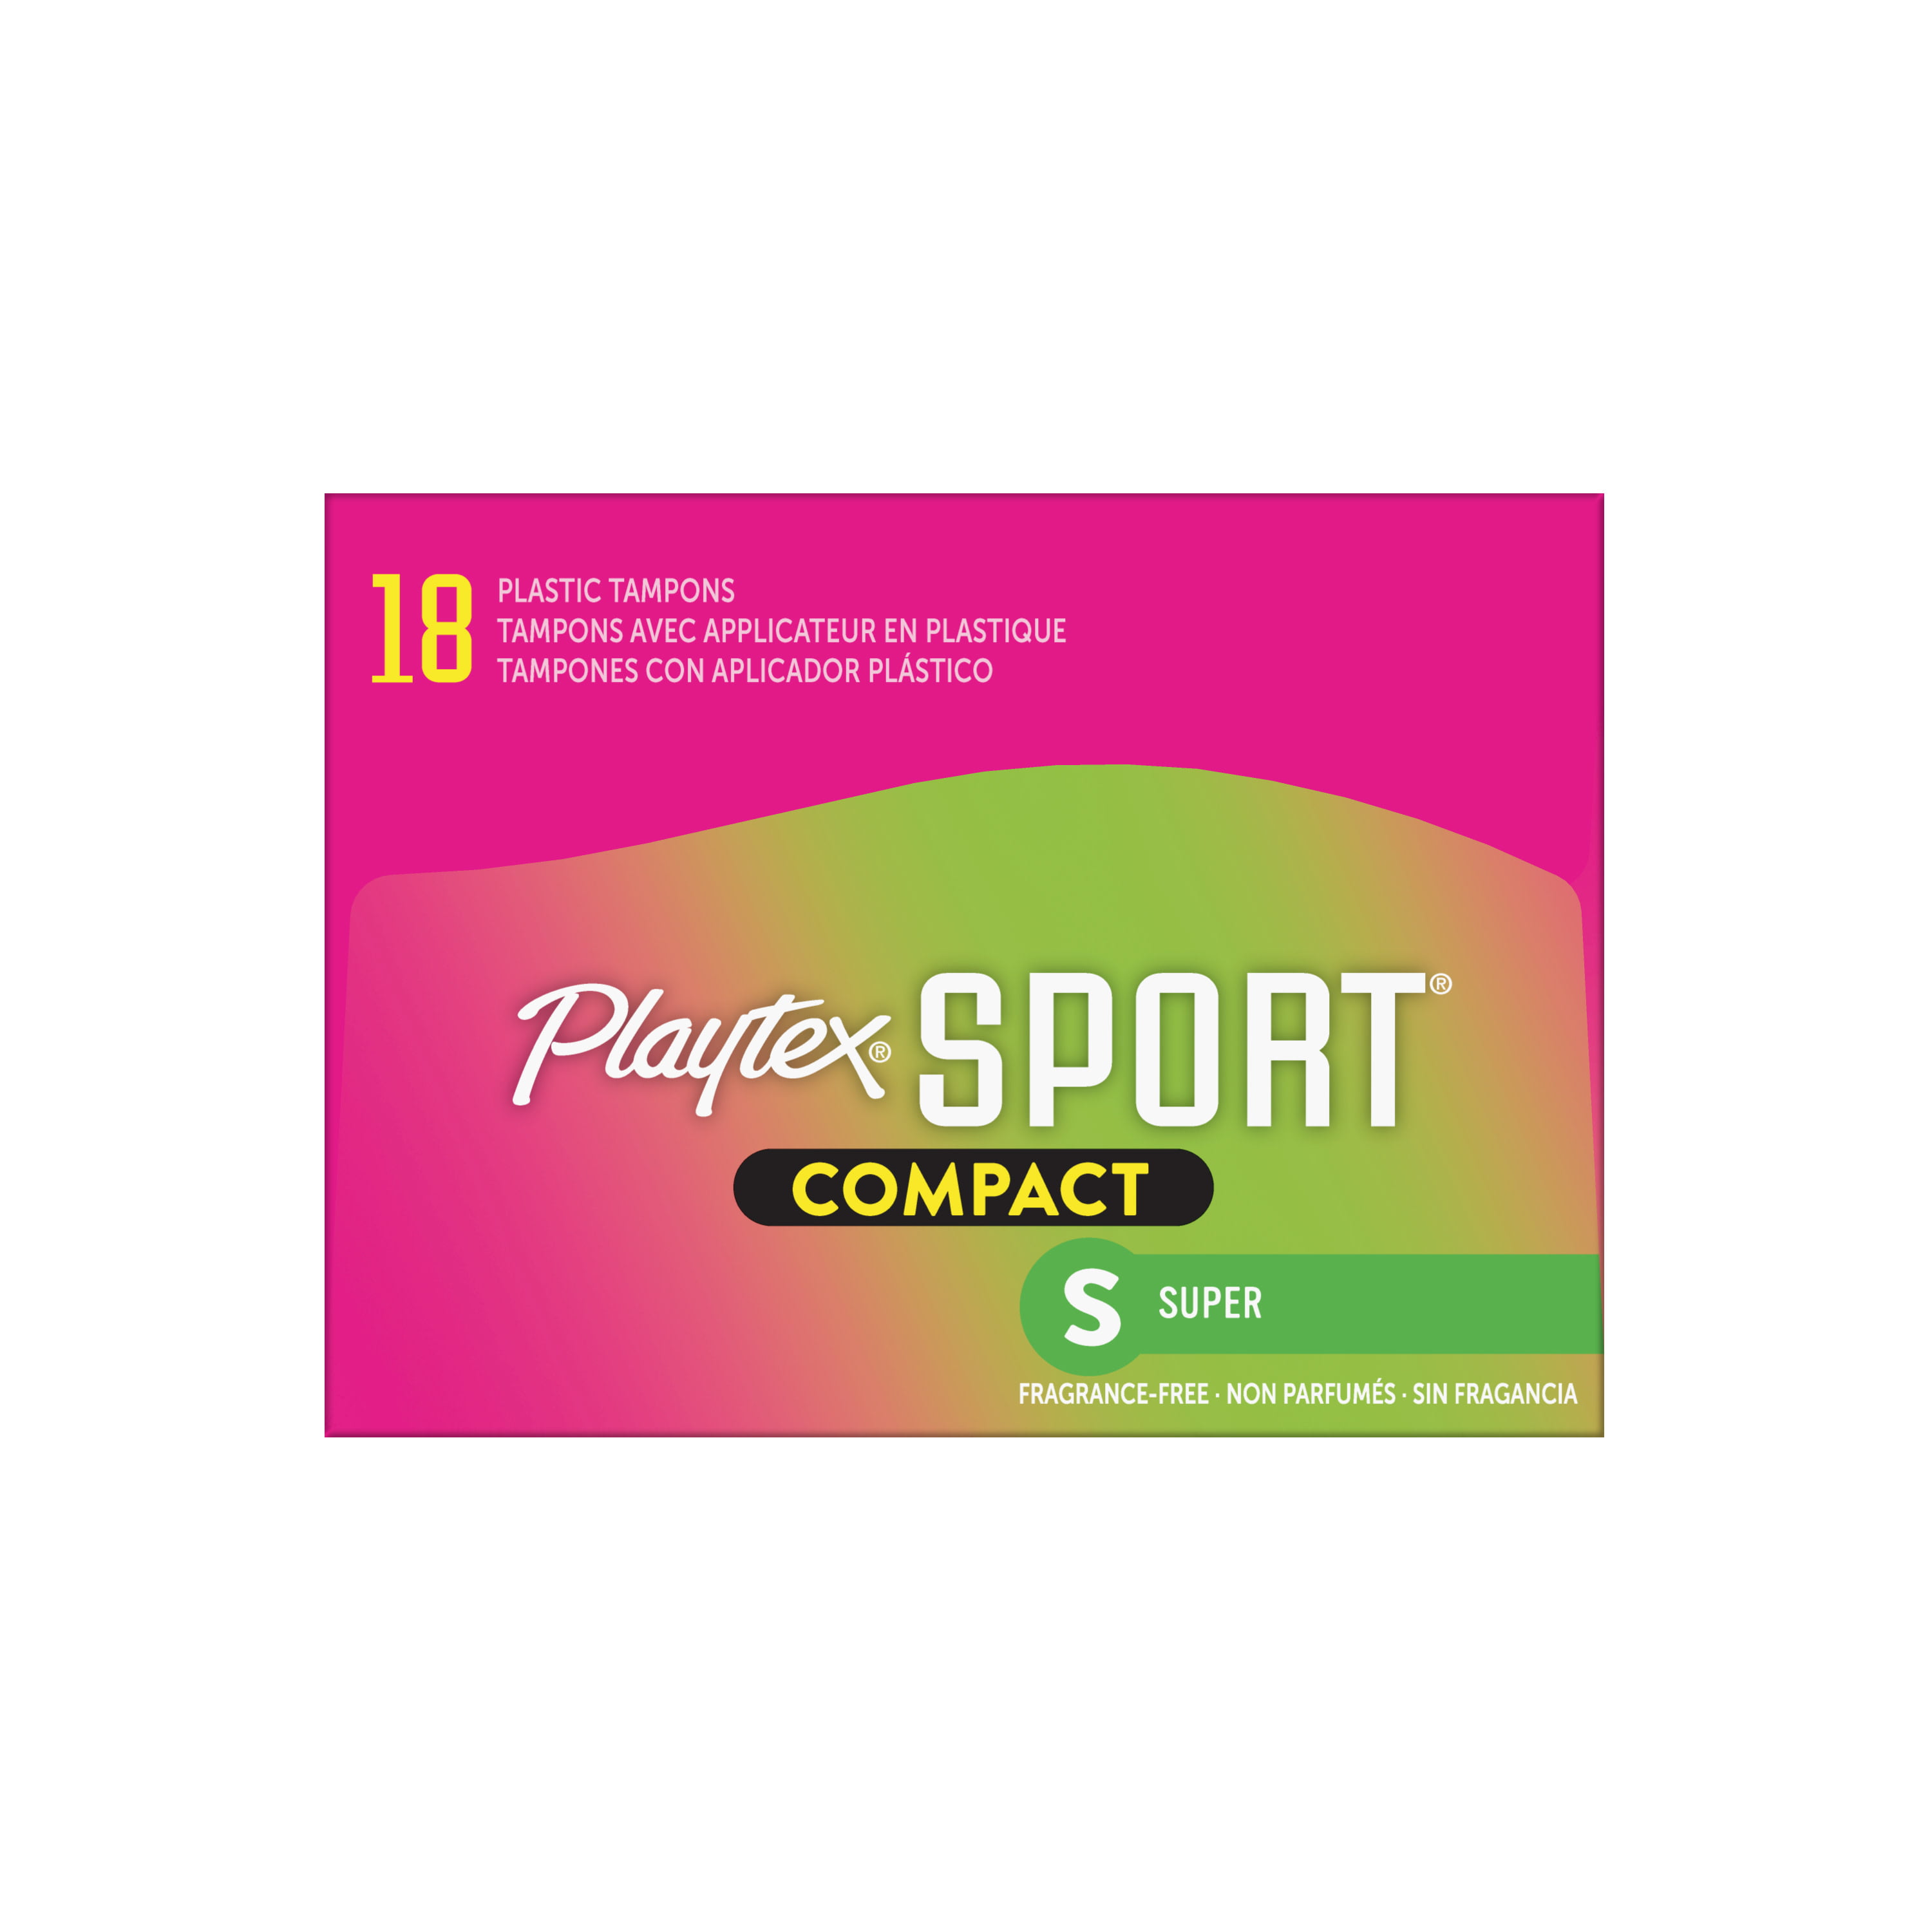 Playtex Sport Compact Plastic Tampons, Unscented, Regular, 18 Ct